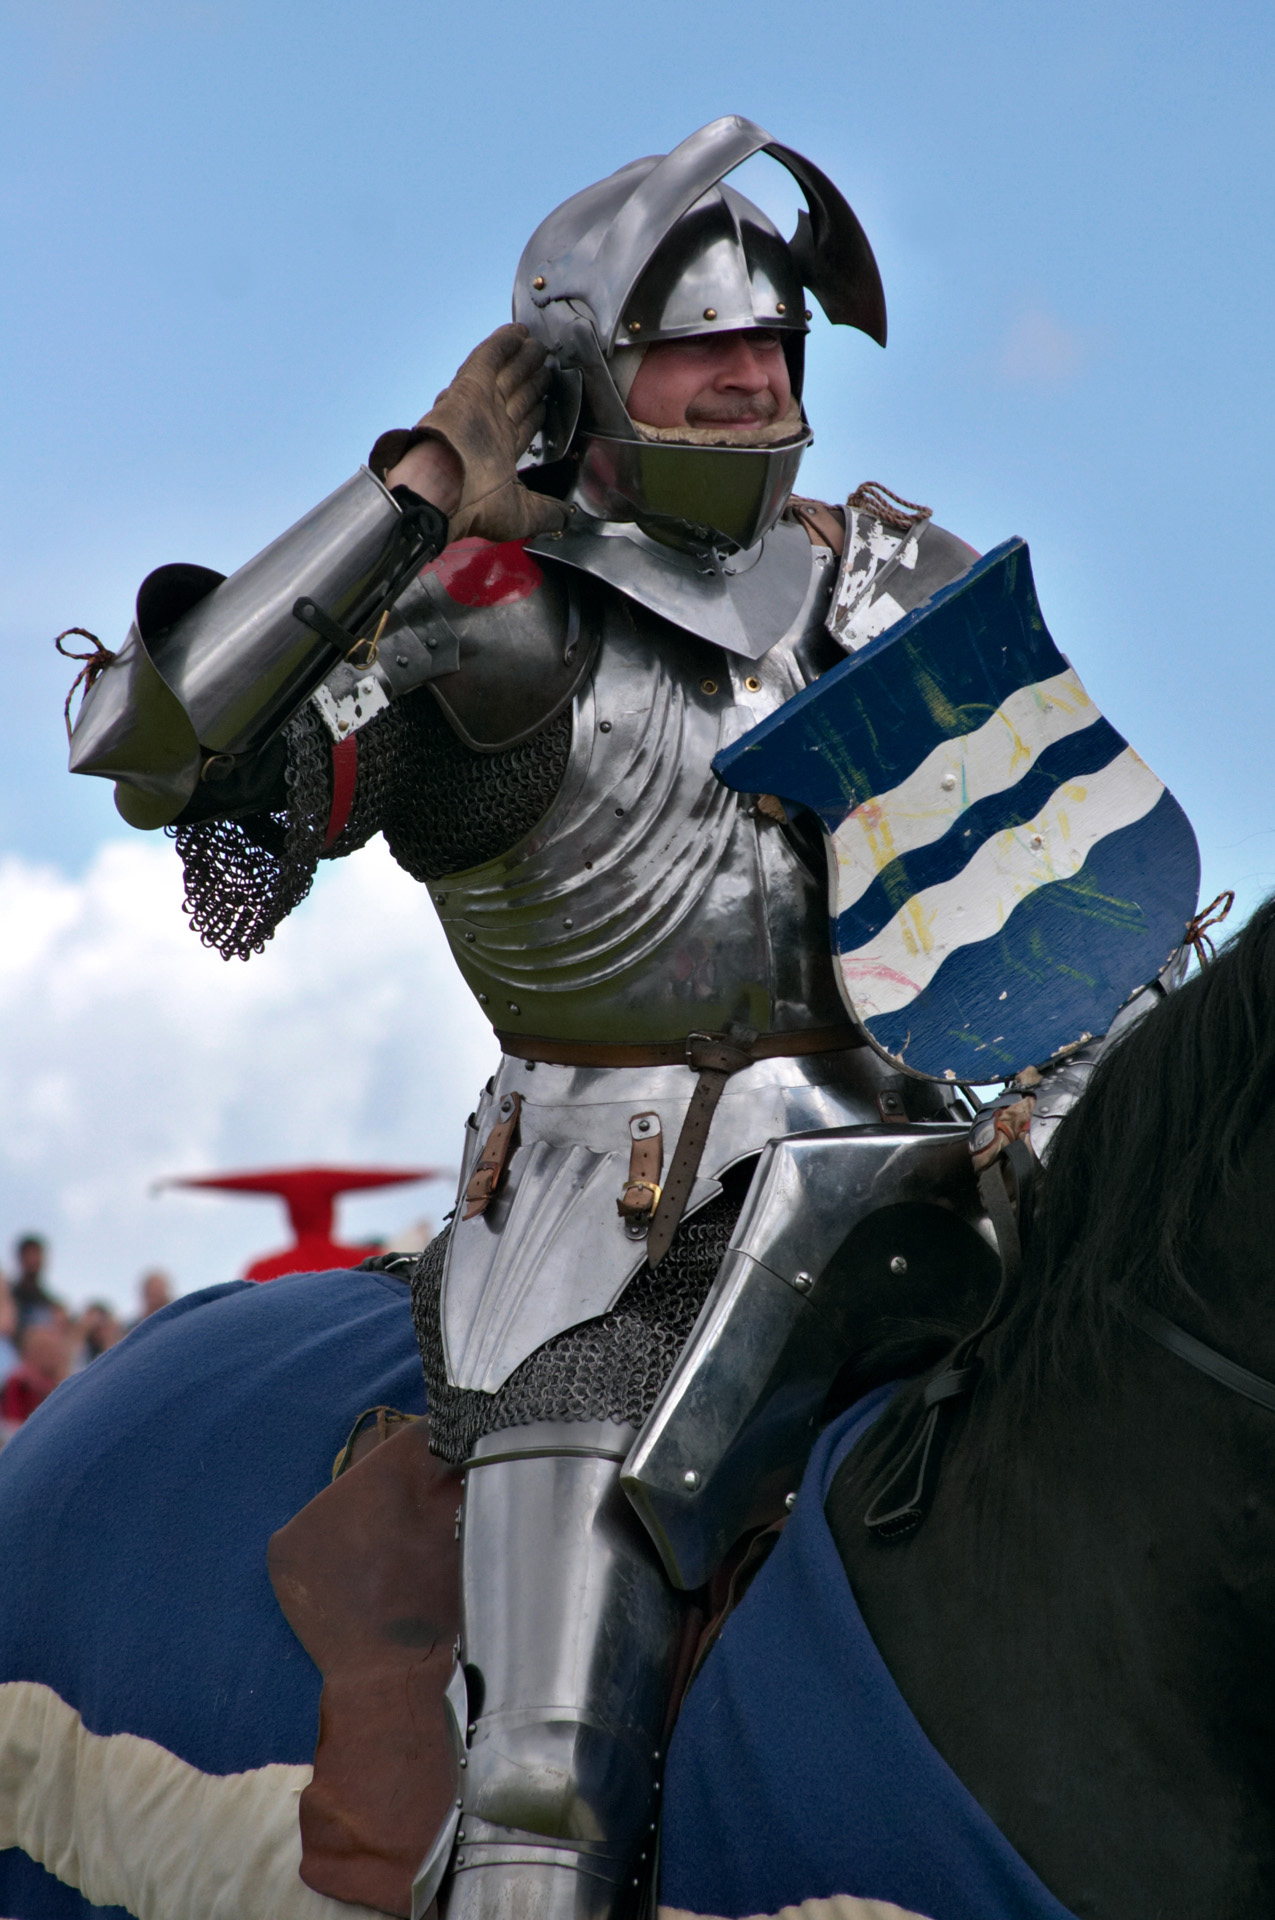 Knight Of The Joust